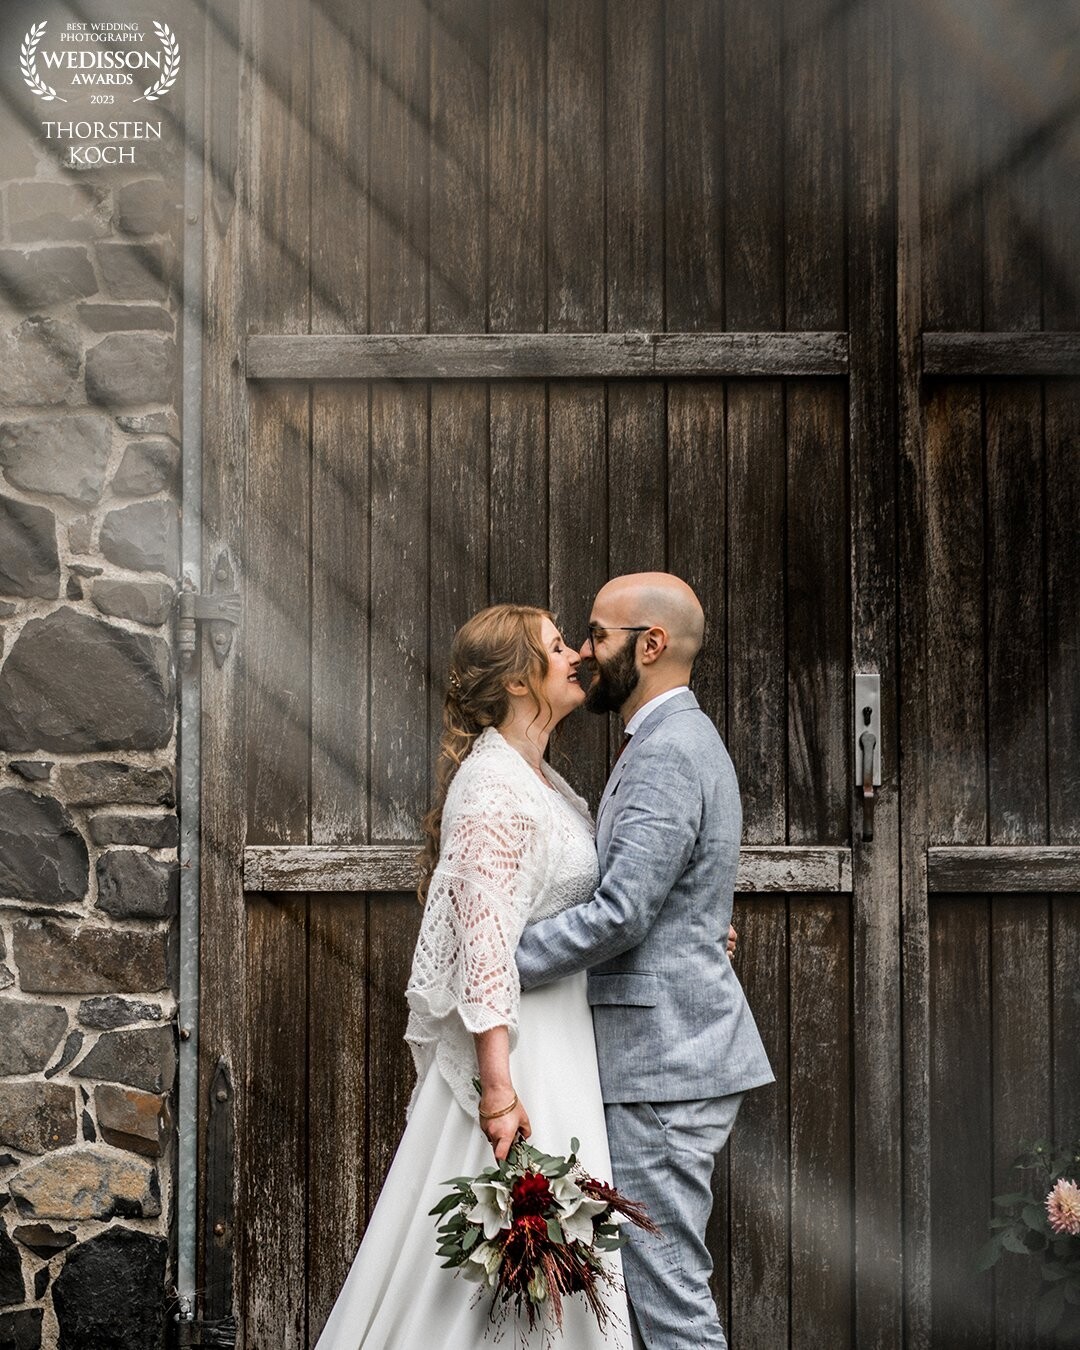 This old wooden barn door is something very classical for me, so I dont use it as a background very often.<br />
But I thougt it would fit to this beautiful, down to earth couple.<br />
To give something special to it, i was using a prism.